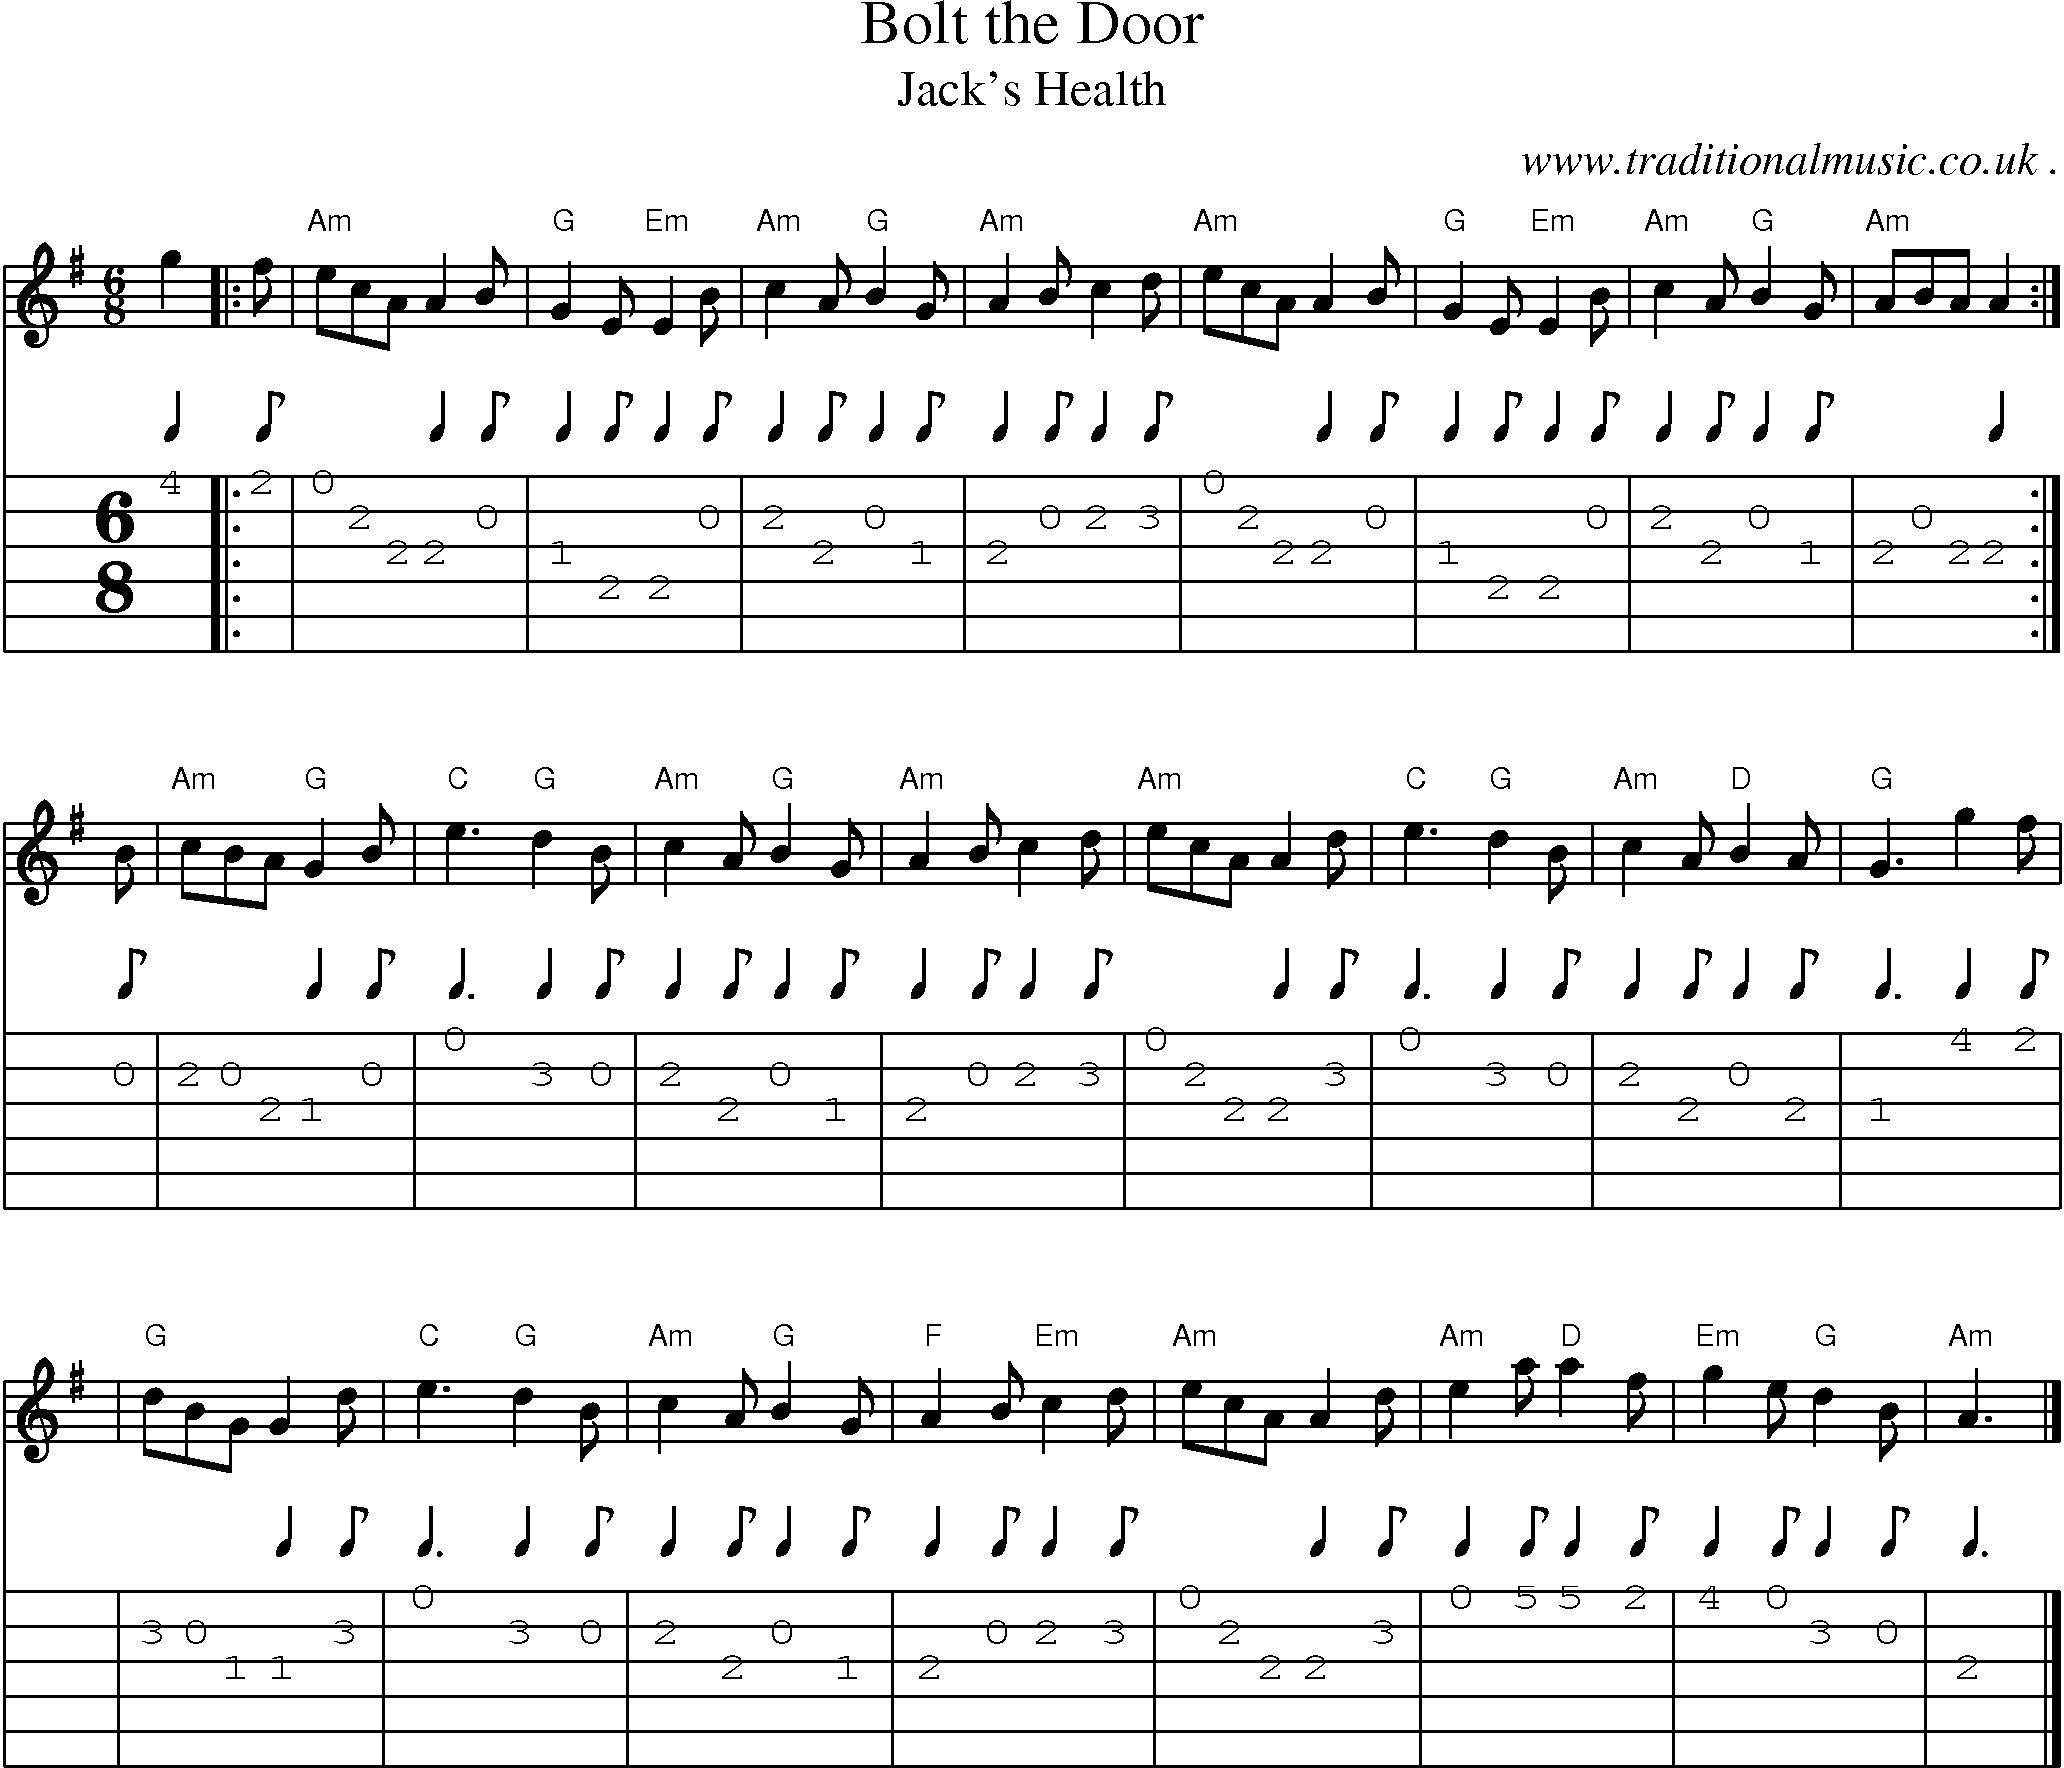 Sheet-music  score, Chords and Guitar Tabs for Bolt The Door